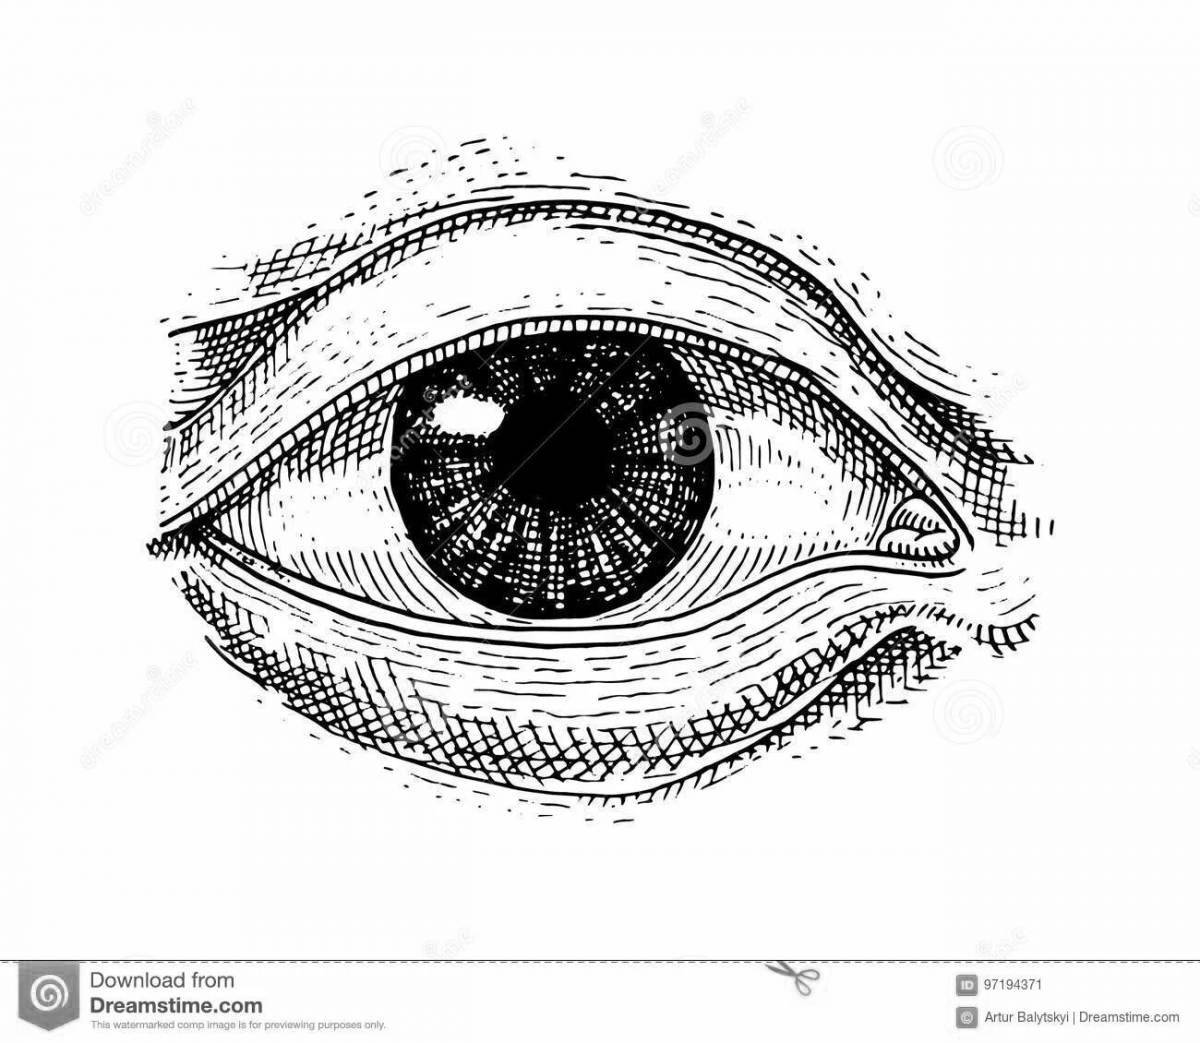 Coloring page of eye structure showing eyes